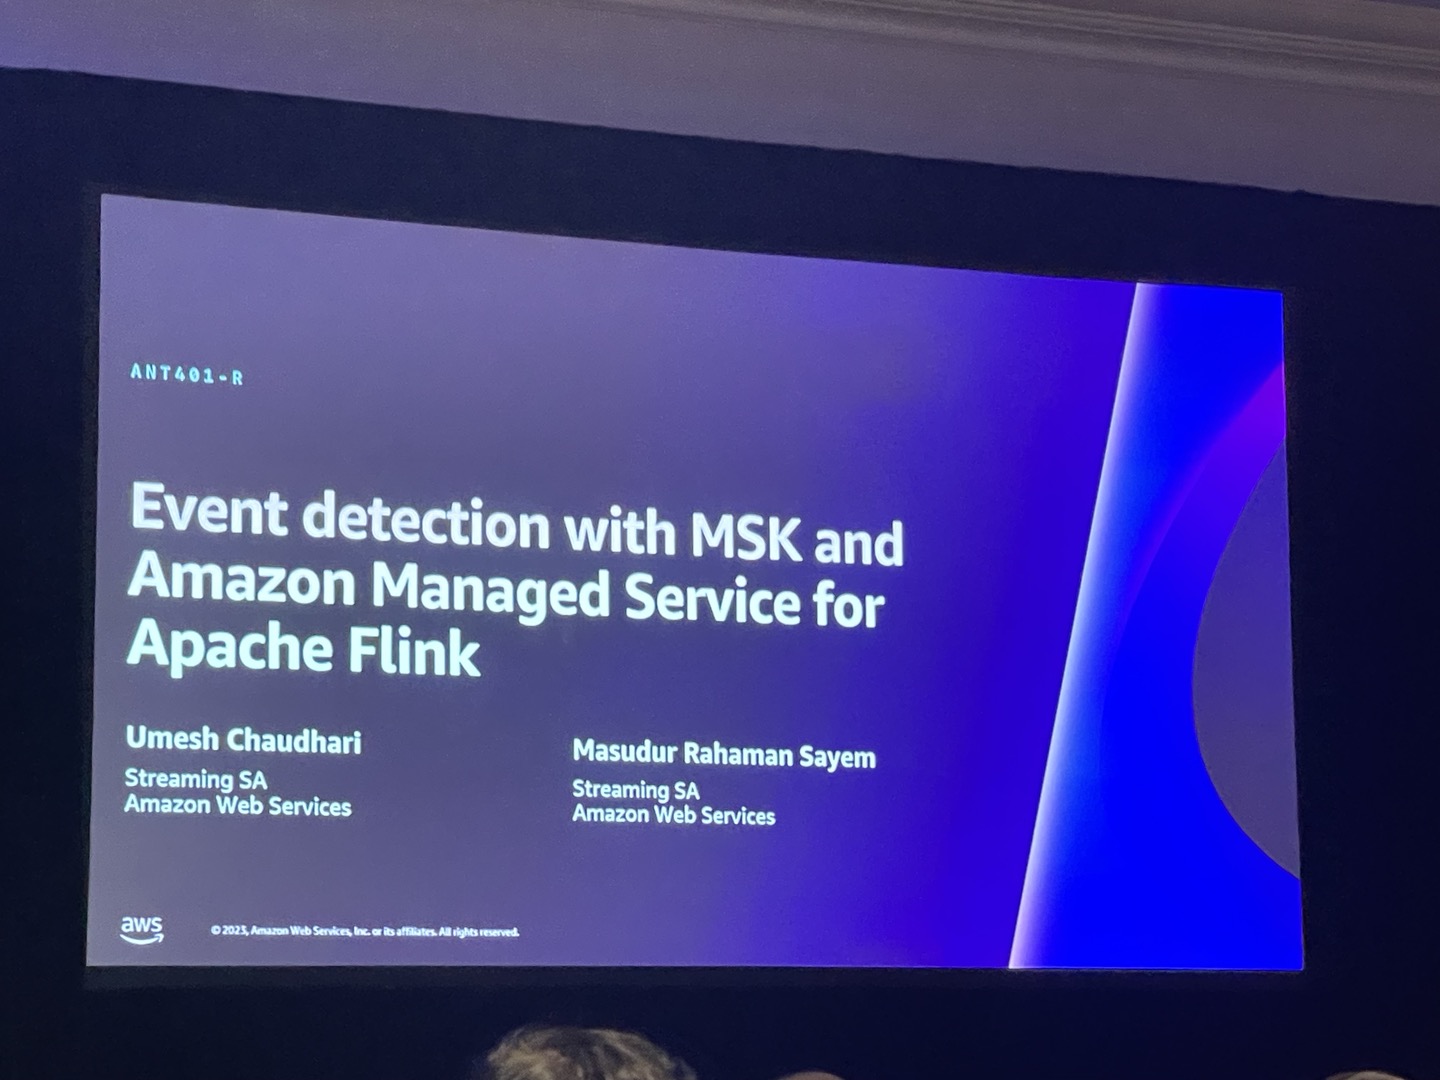 Event detection with MSK and Amazon Managed Service for Apache Flink